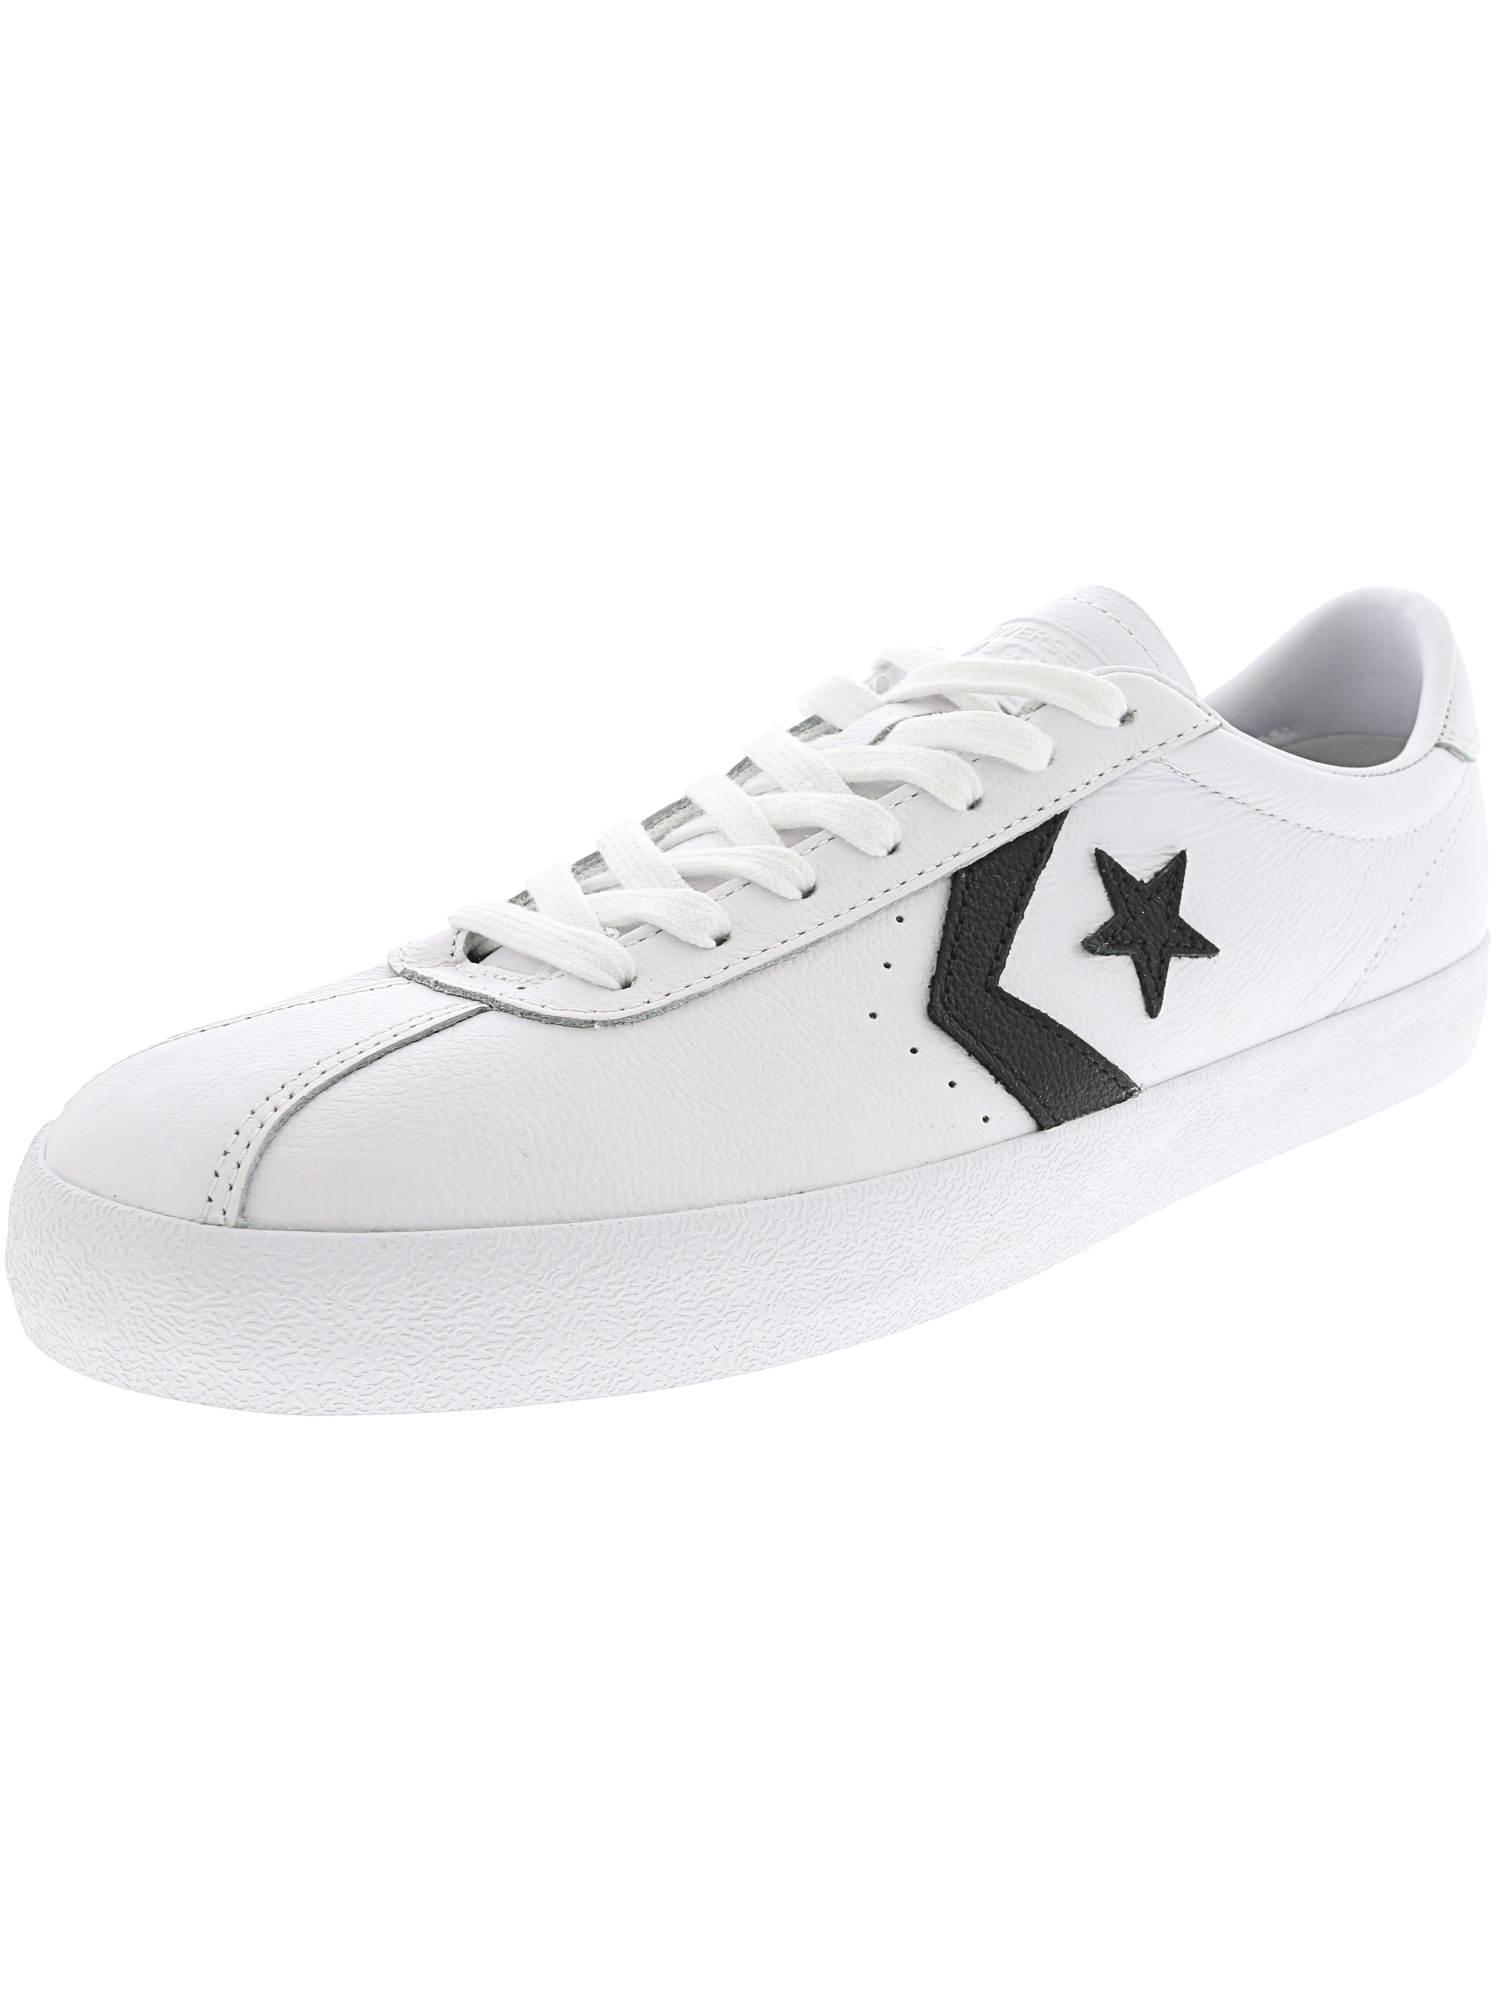 Converse Mens Breakpoint Leather Low Top Lace up Optical White Size 4.5 ...